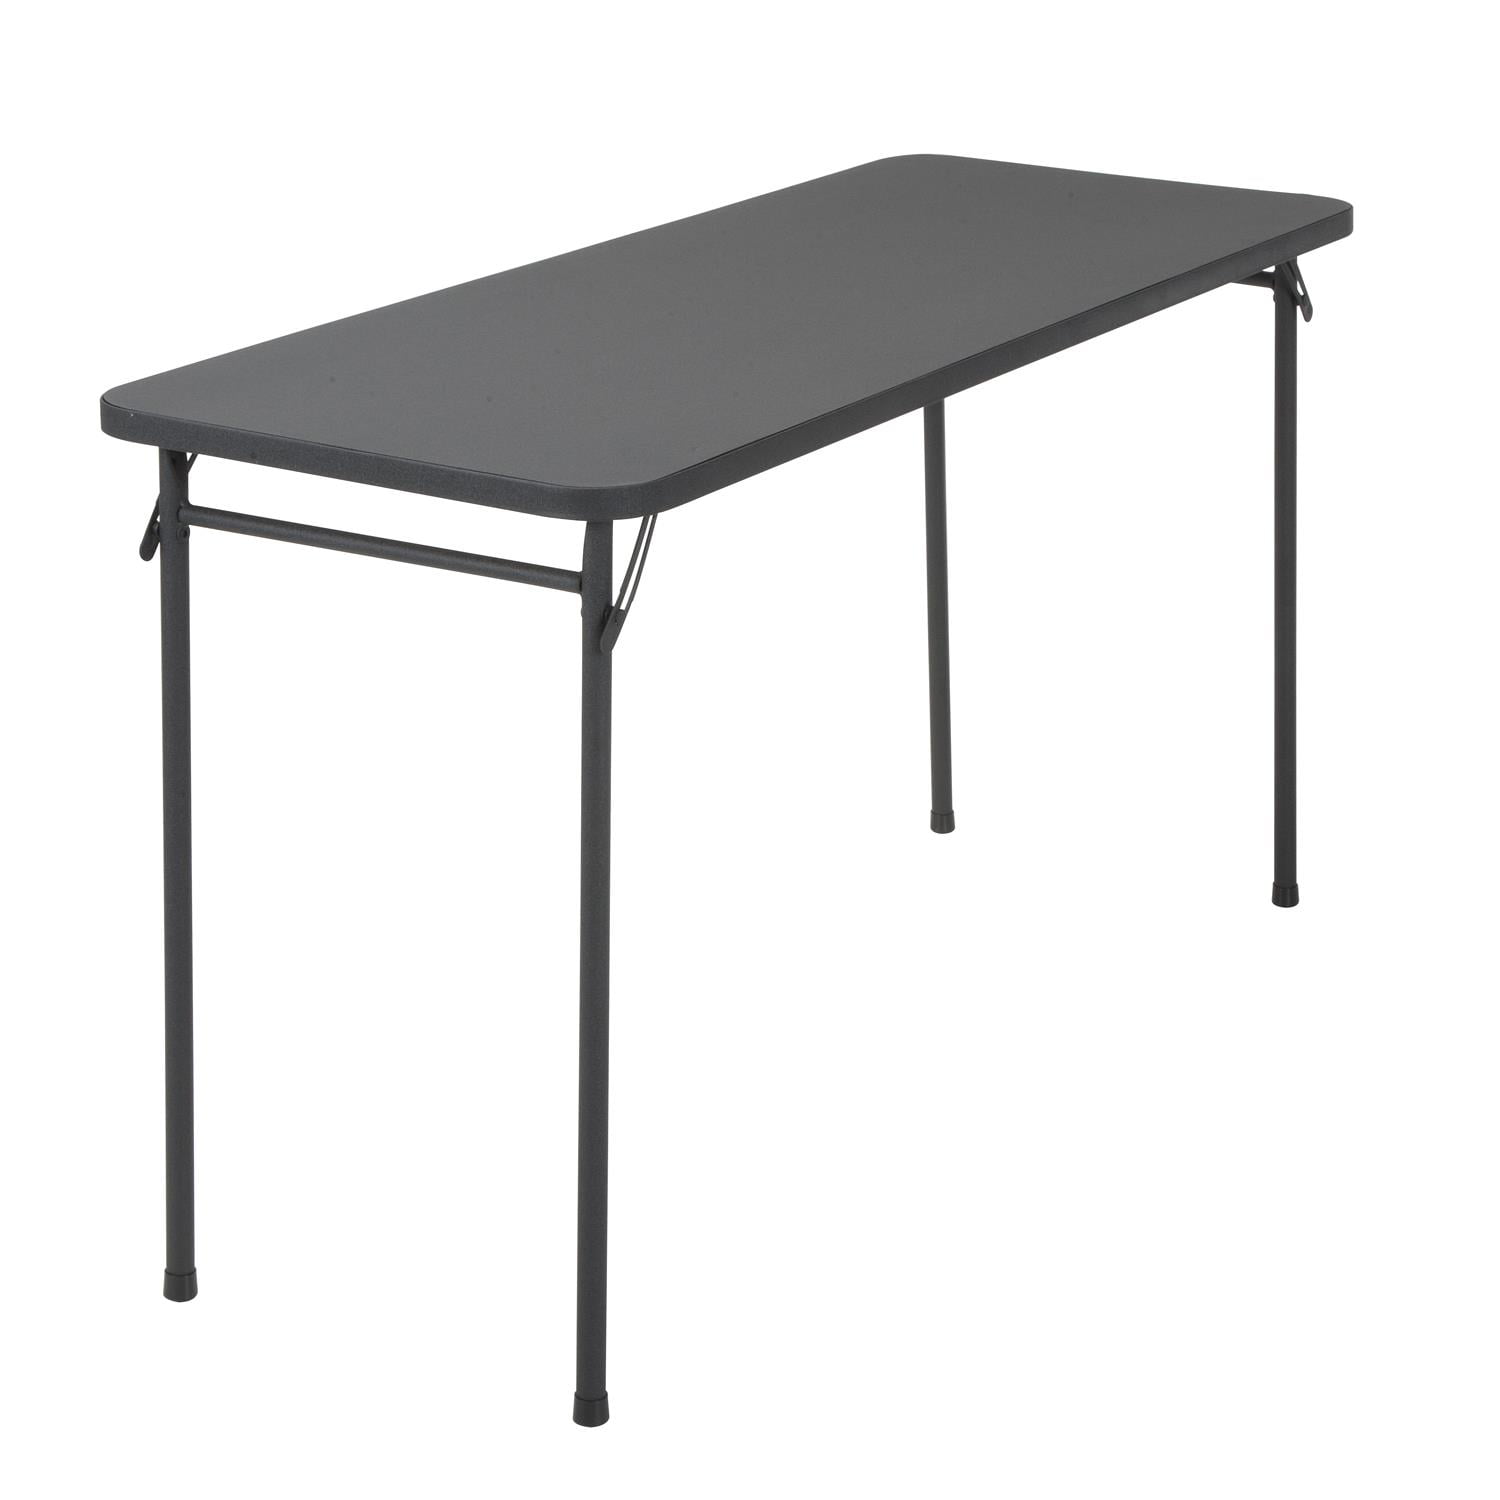 Black 20 x 48-Inch Cosco Products Vinyl Top Folding Table 